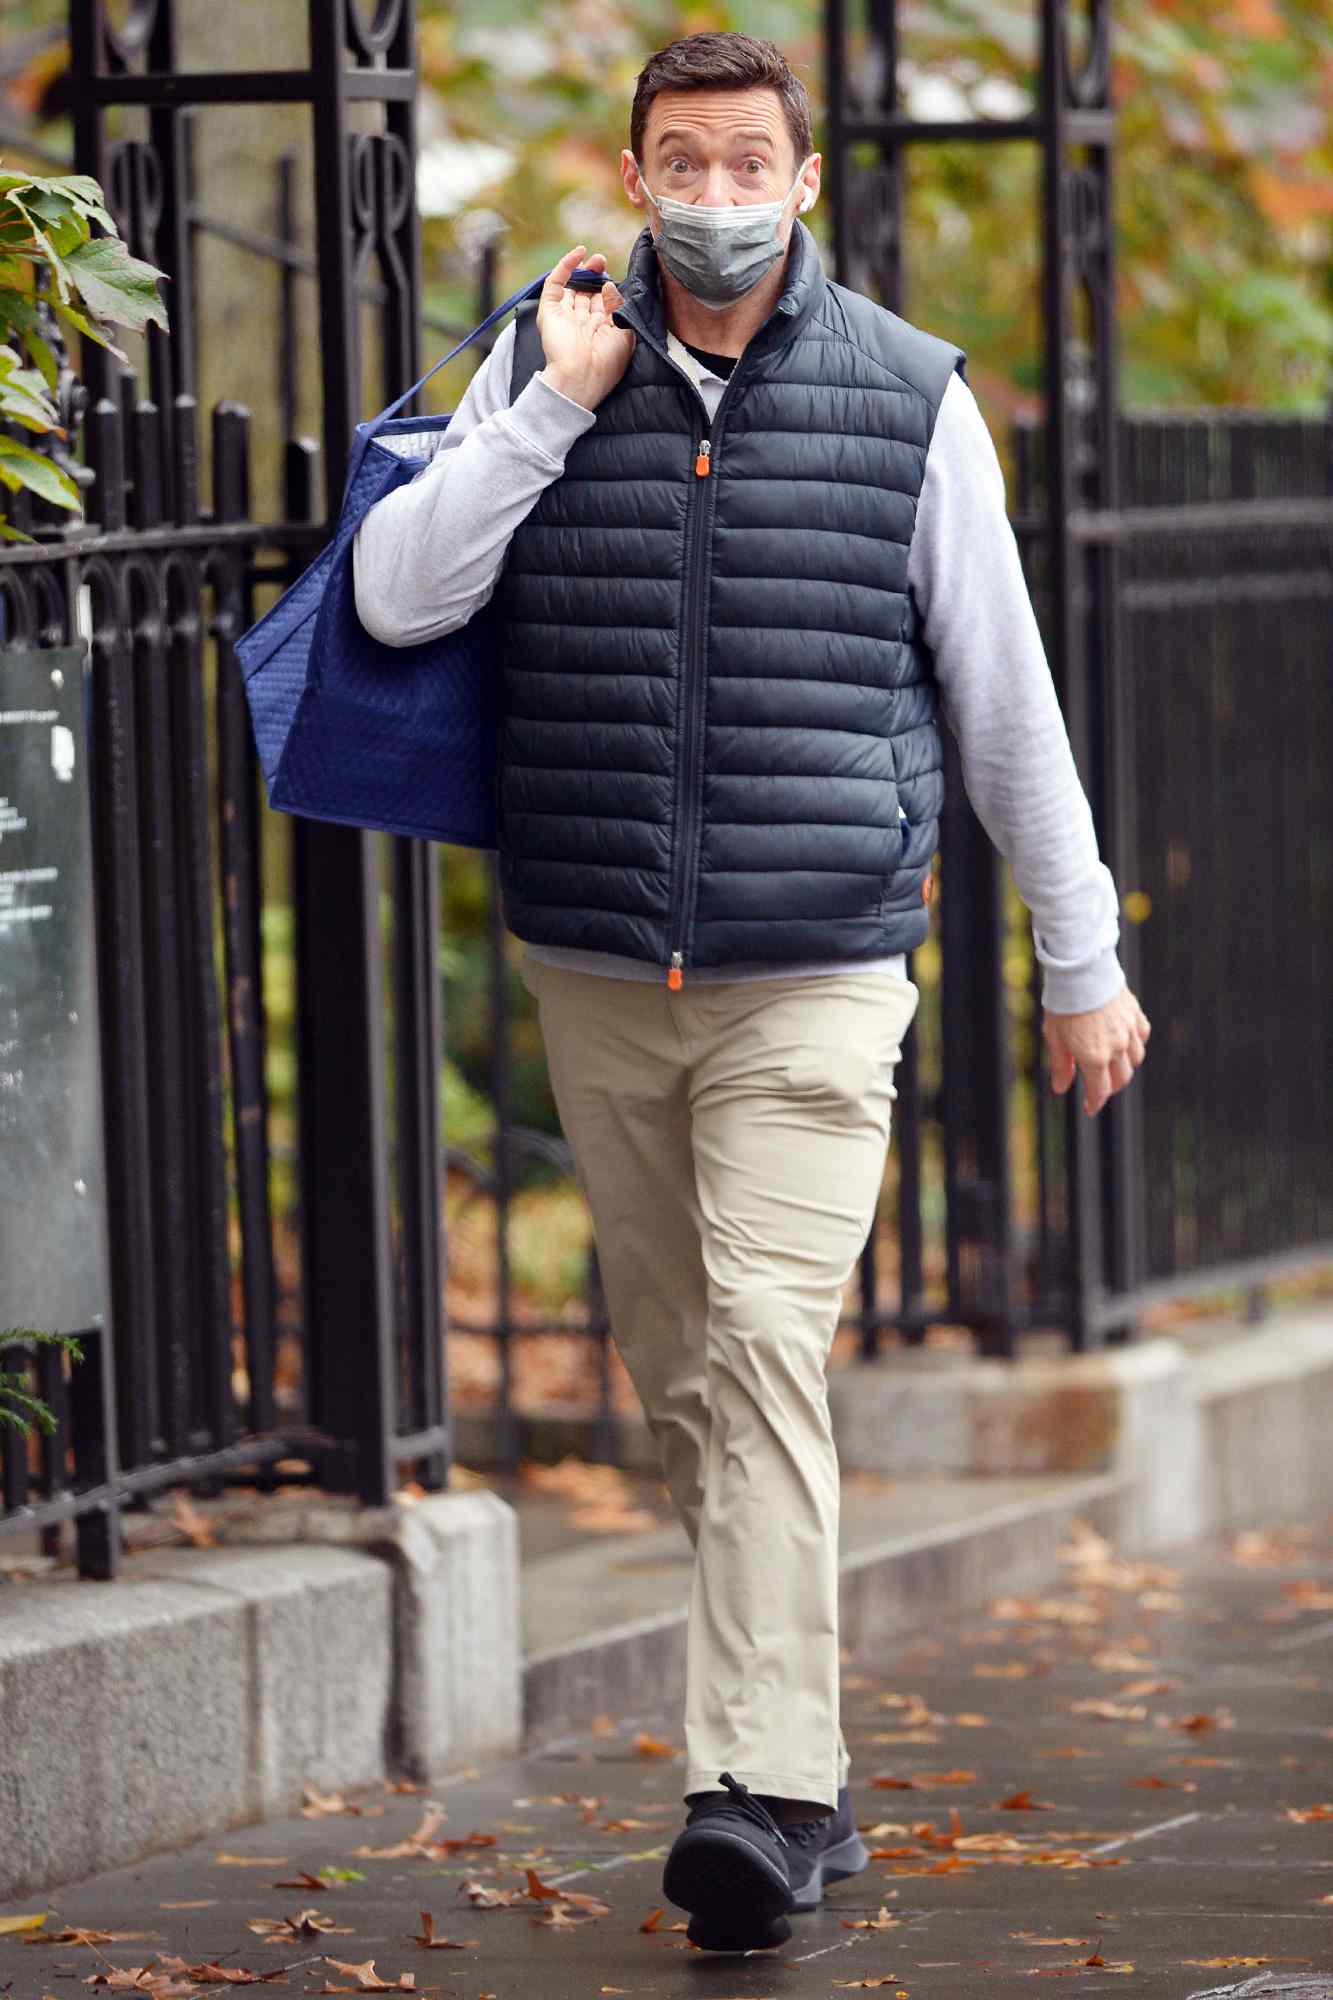 Hugh Jackman is photographed going grocery shopping in the West Village neighborhood of New York City